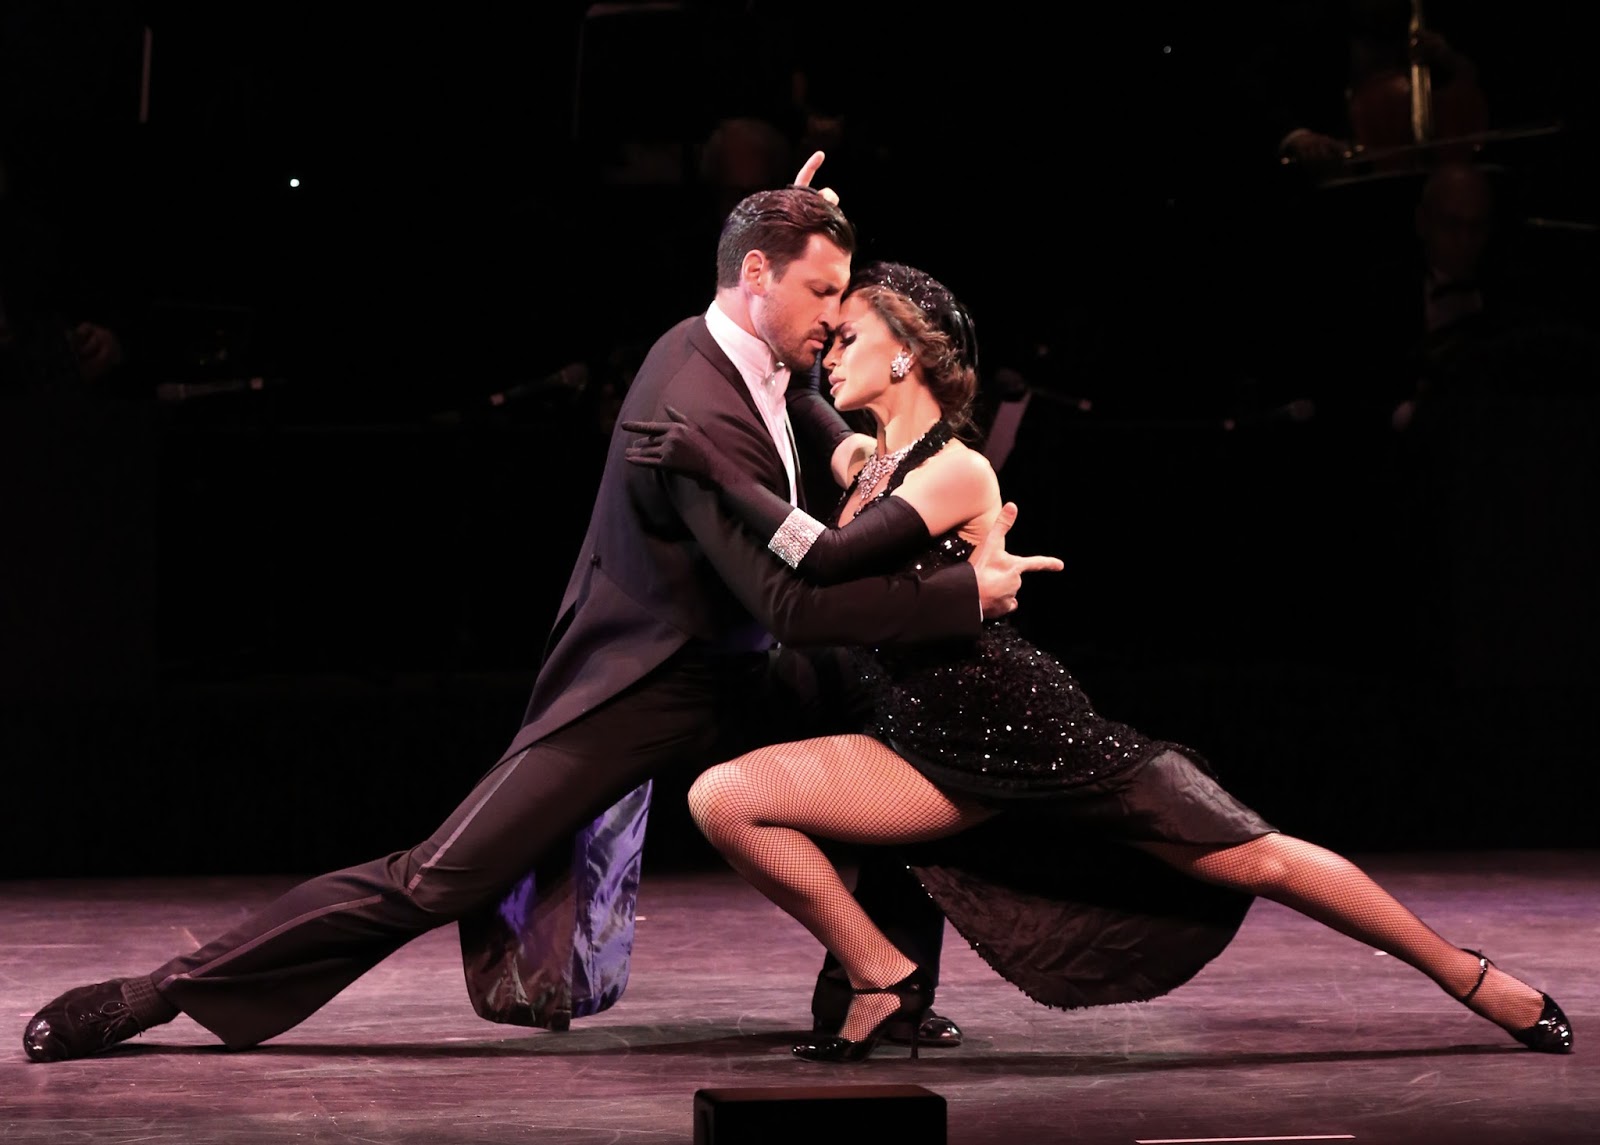 1000 Images About Bewegung Tango Argentino On Pinterest Tango Argentine Tango And Tango Dance